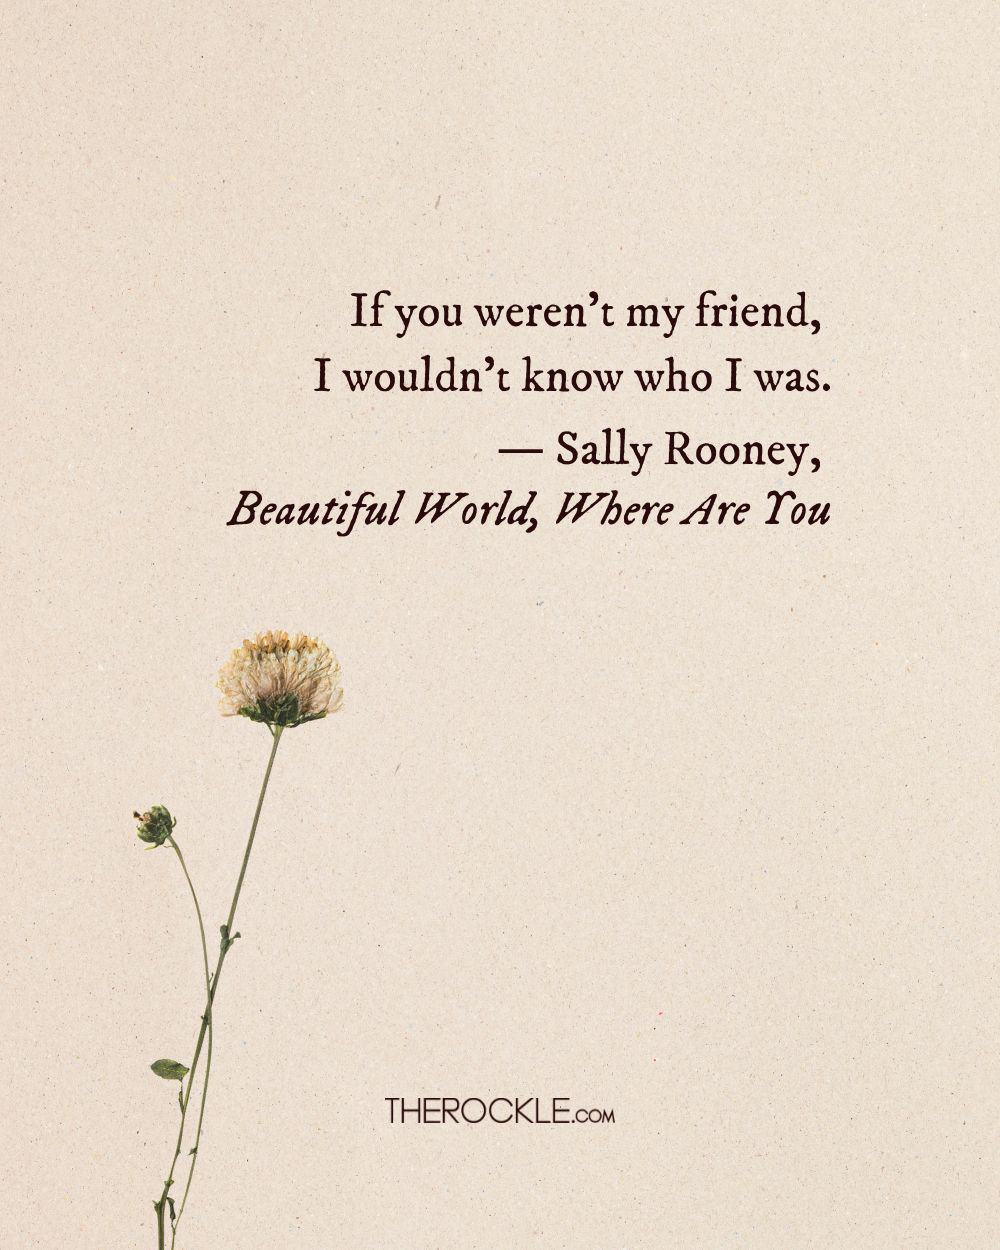 Sally Rooney book quote on identity and friendship